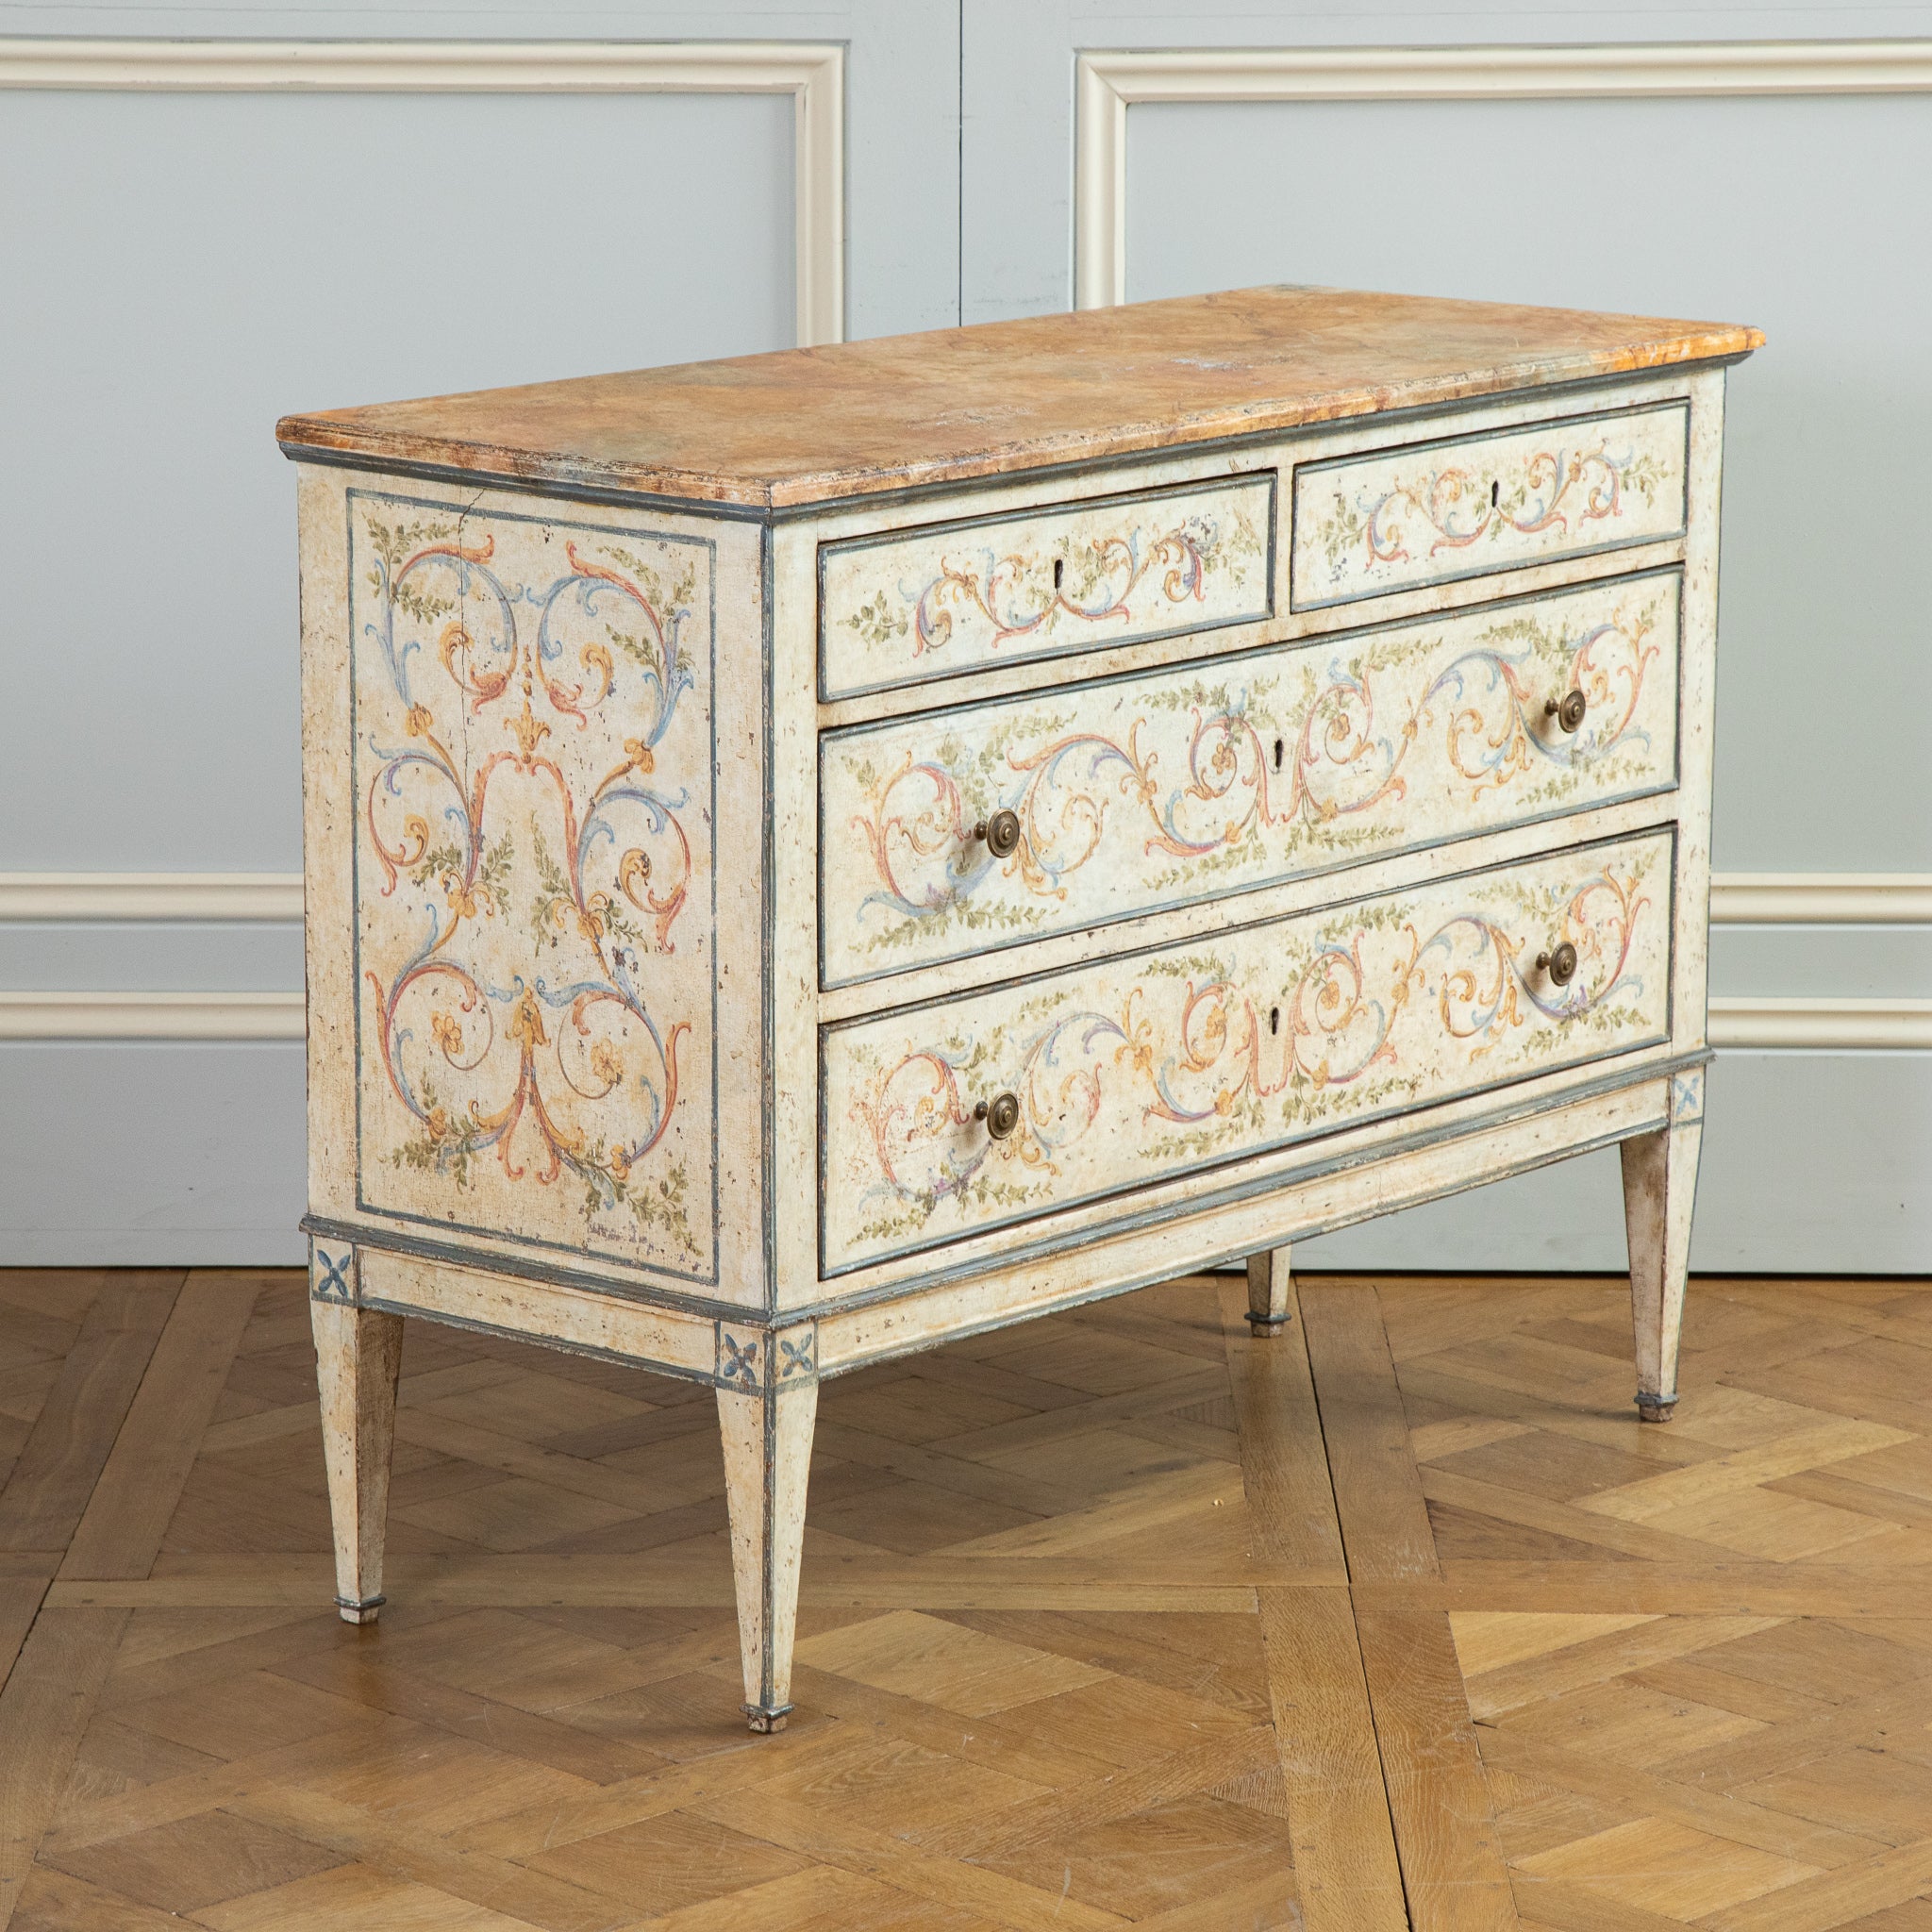 A Late 19th Century Venetian commode, hand painted in the Neoclassical style featuring fine scroll work in hues of brick pinks, yellow ochres, olive greens and blues on an old white naturally aged, craquelure background. The overall warm tones of